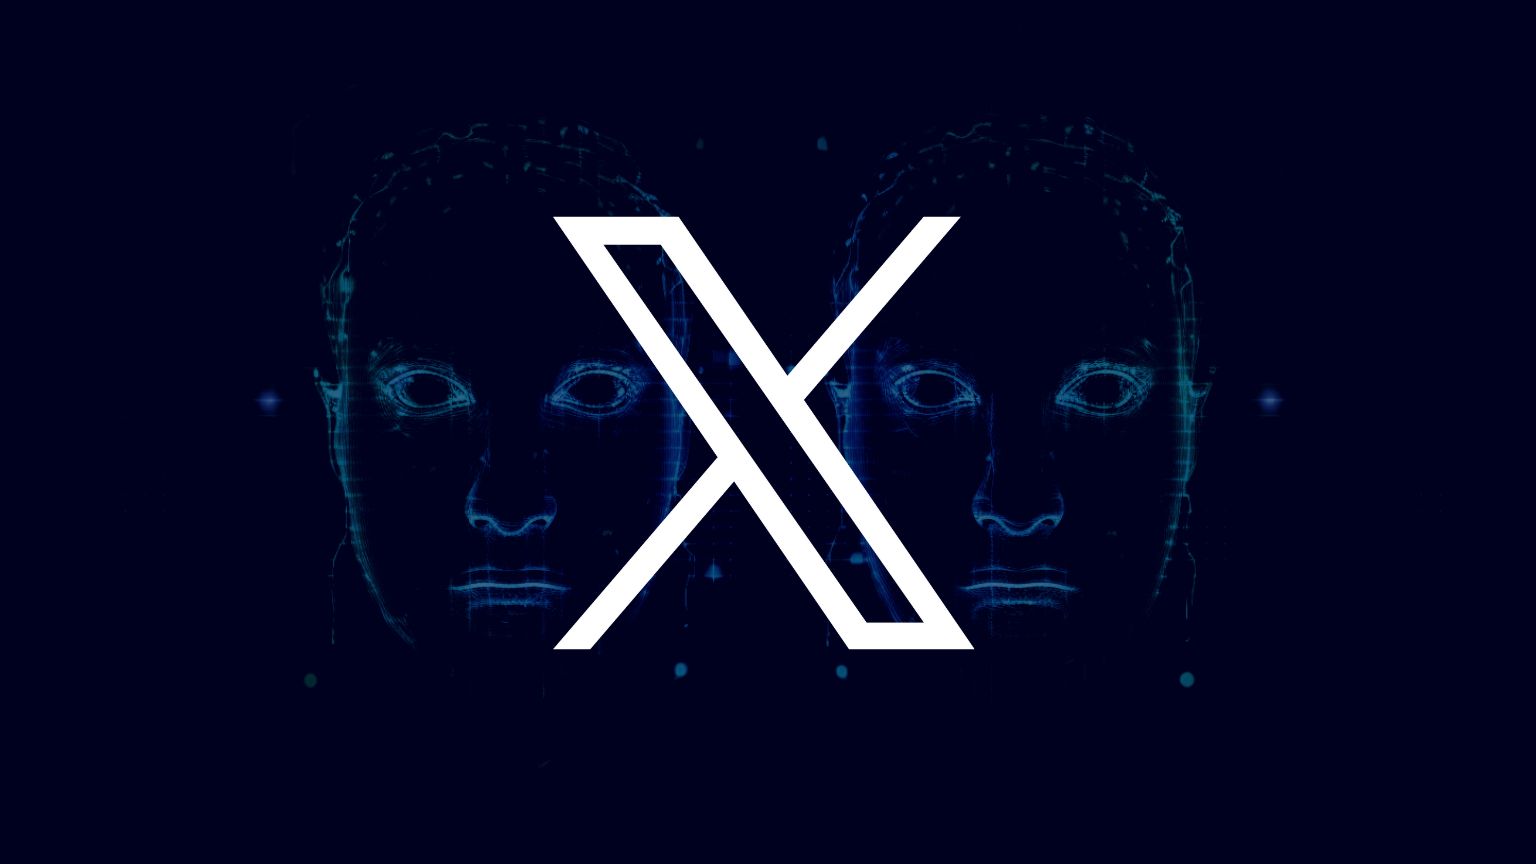 X’s New Privacy Policy Gives Itself Permission To Collect Biometric Data